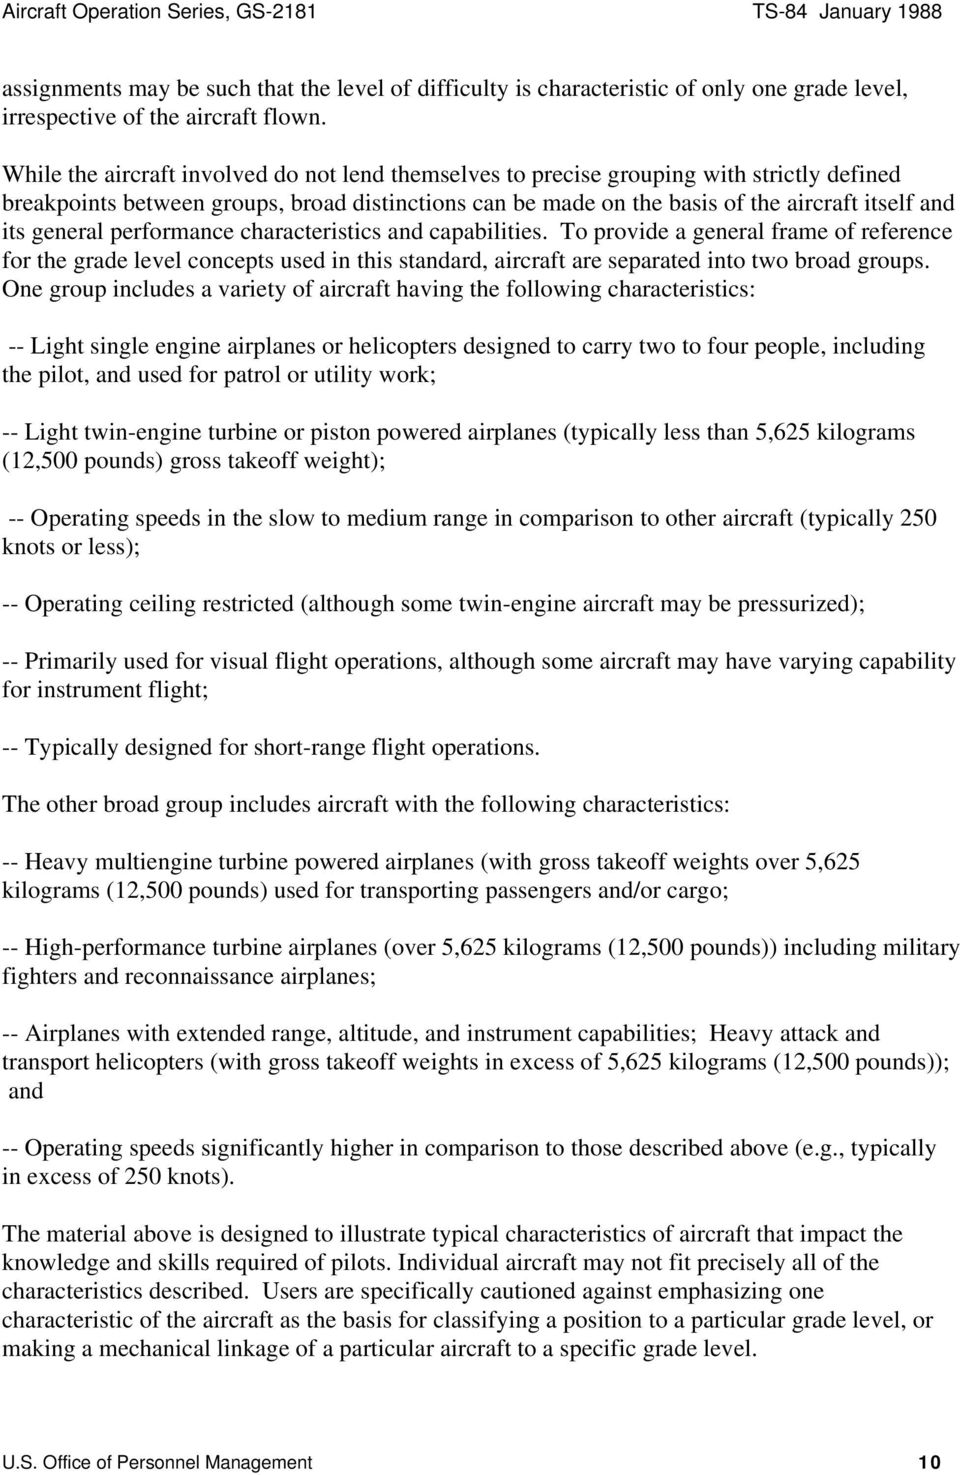 general performance characteristics and capabilities. To provide a general frame of reference for the grade level concepts used in this standard, aircraft are separated into two broad groups.